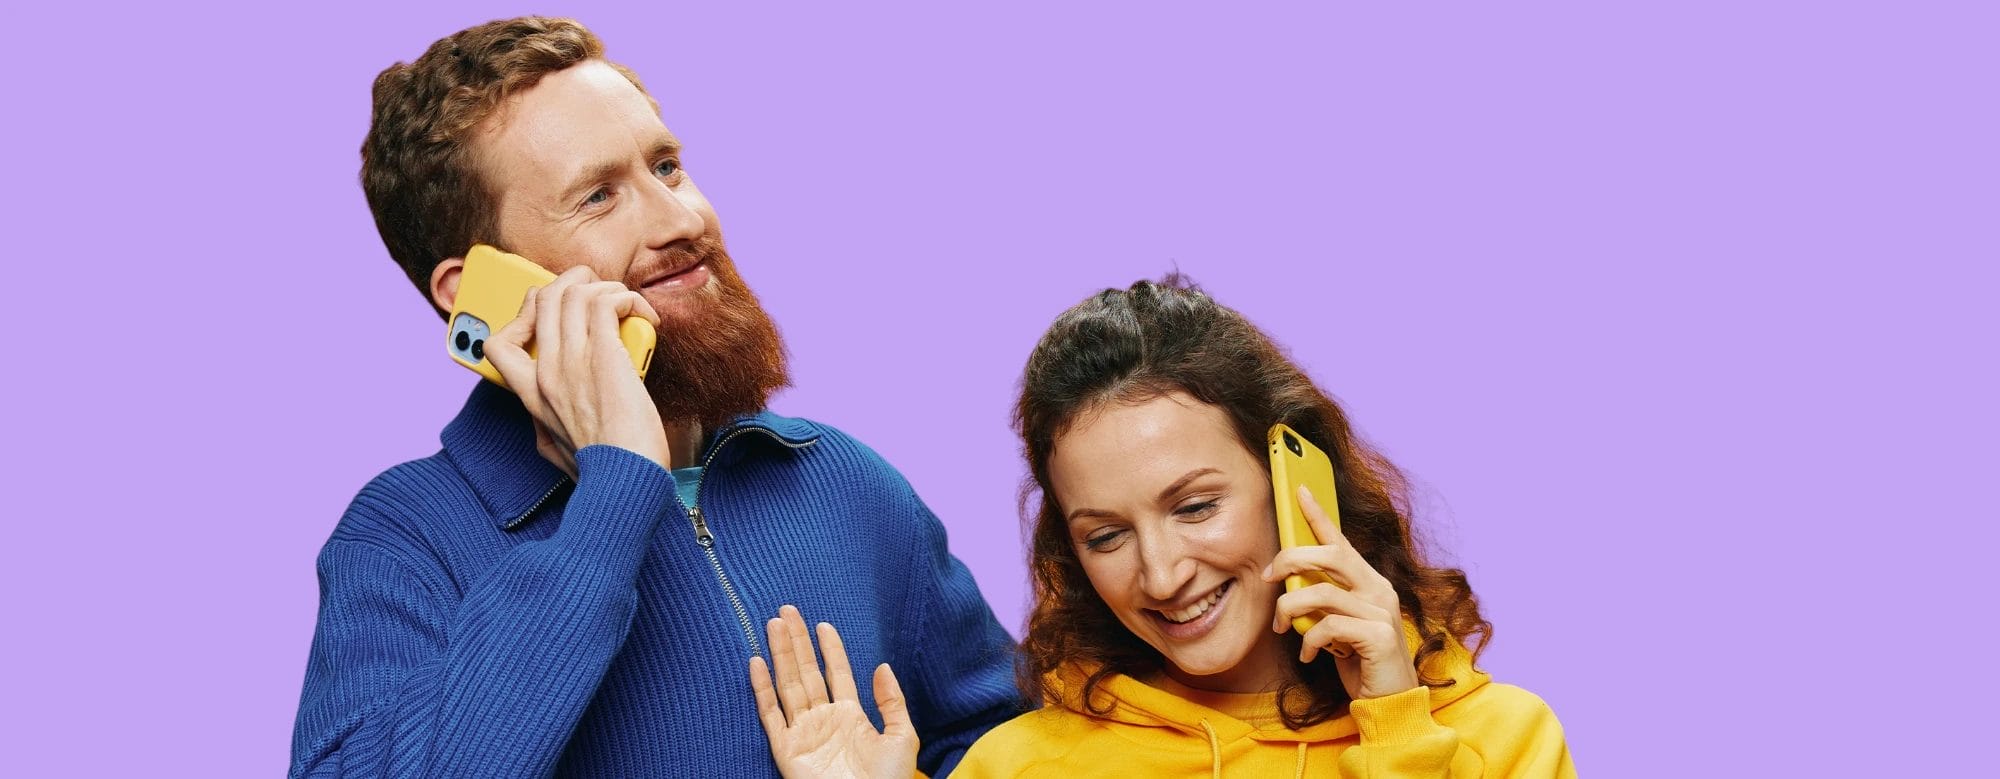 Two people talking on yellow smartphones. The person on the left is wearing a blue jacket; the person on the right is wearing a yellow sweater. The background is solid light purple.